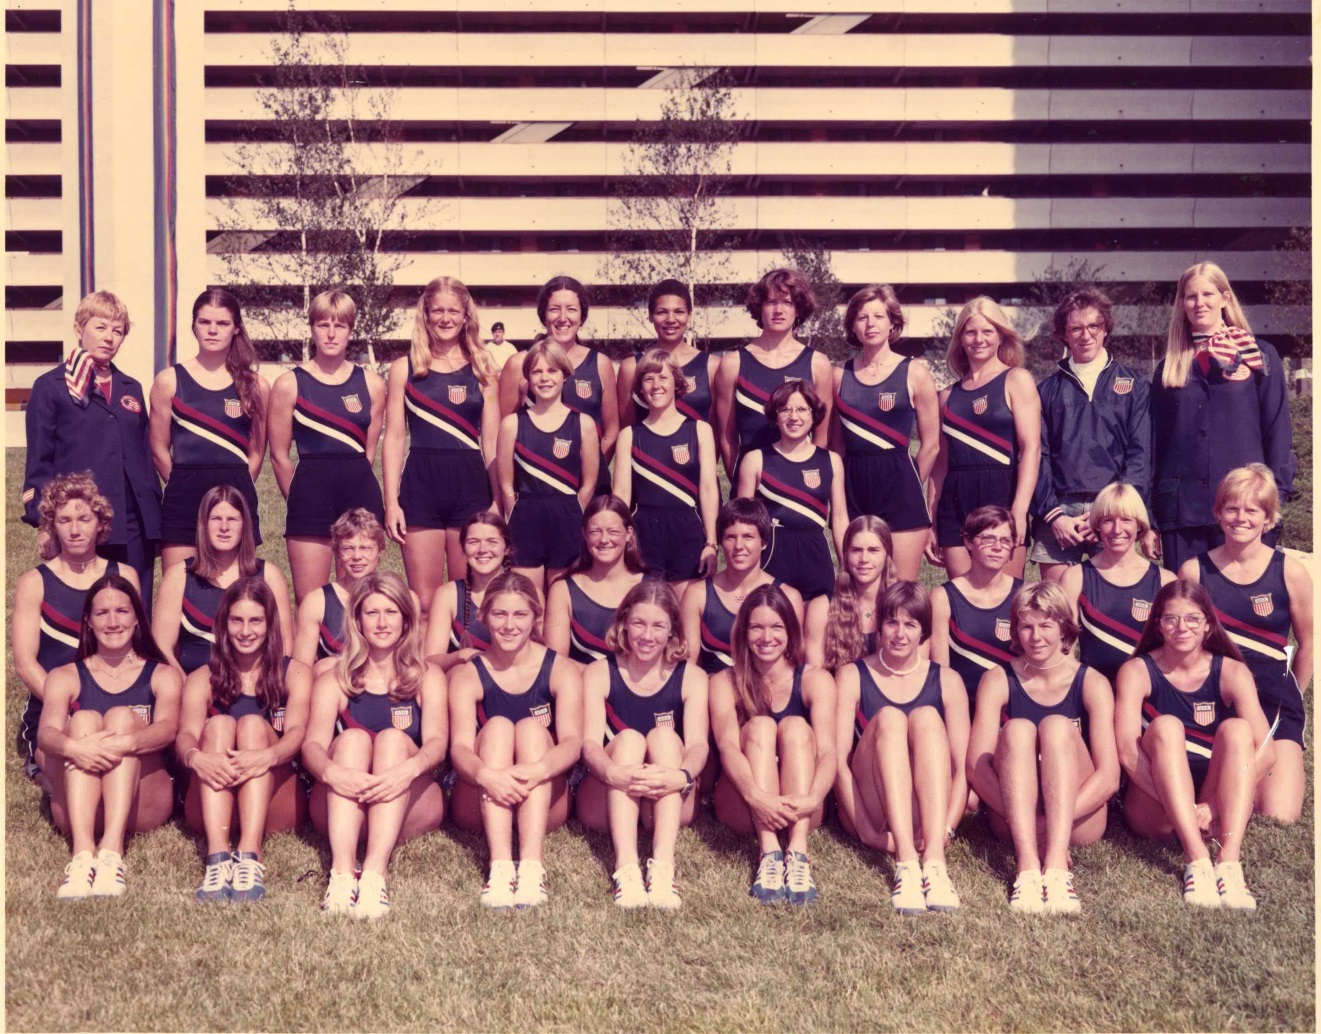 The 1976 US Women’s Olympic Rowing Team